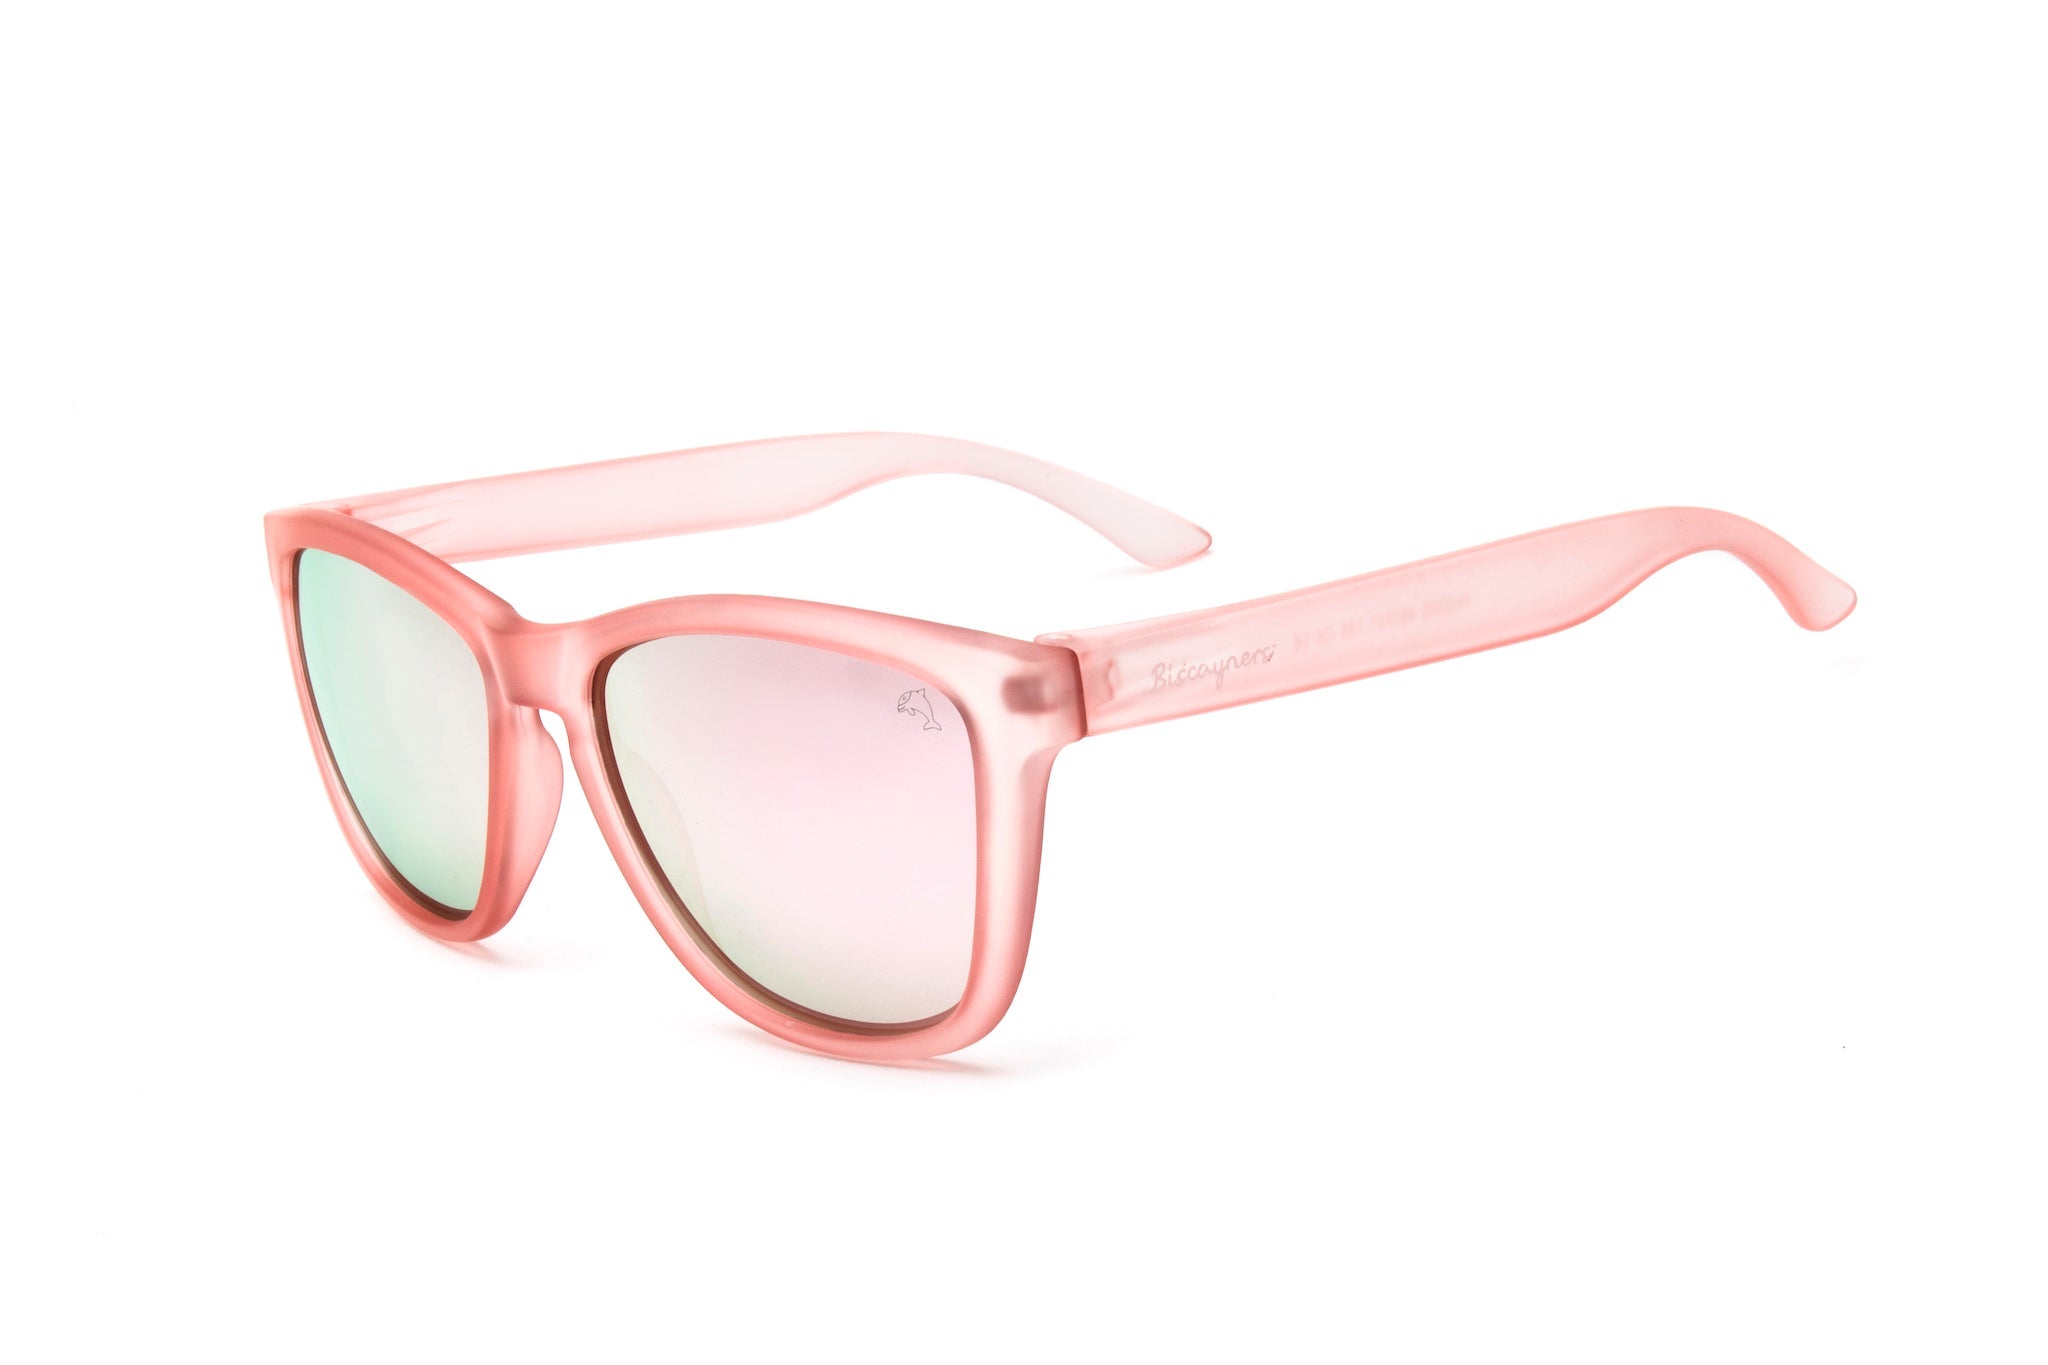 Biscayners Sunglasses |  Unbreakable Pink